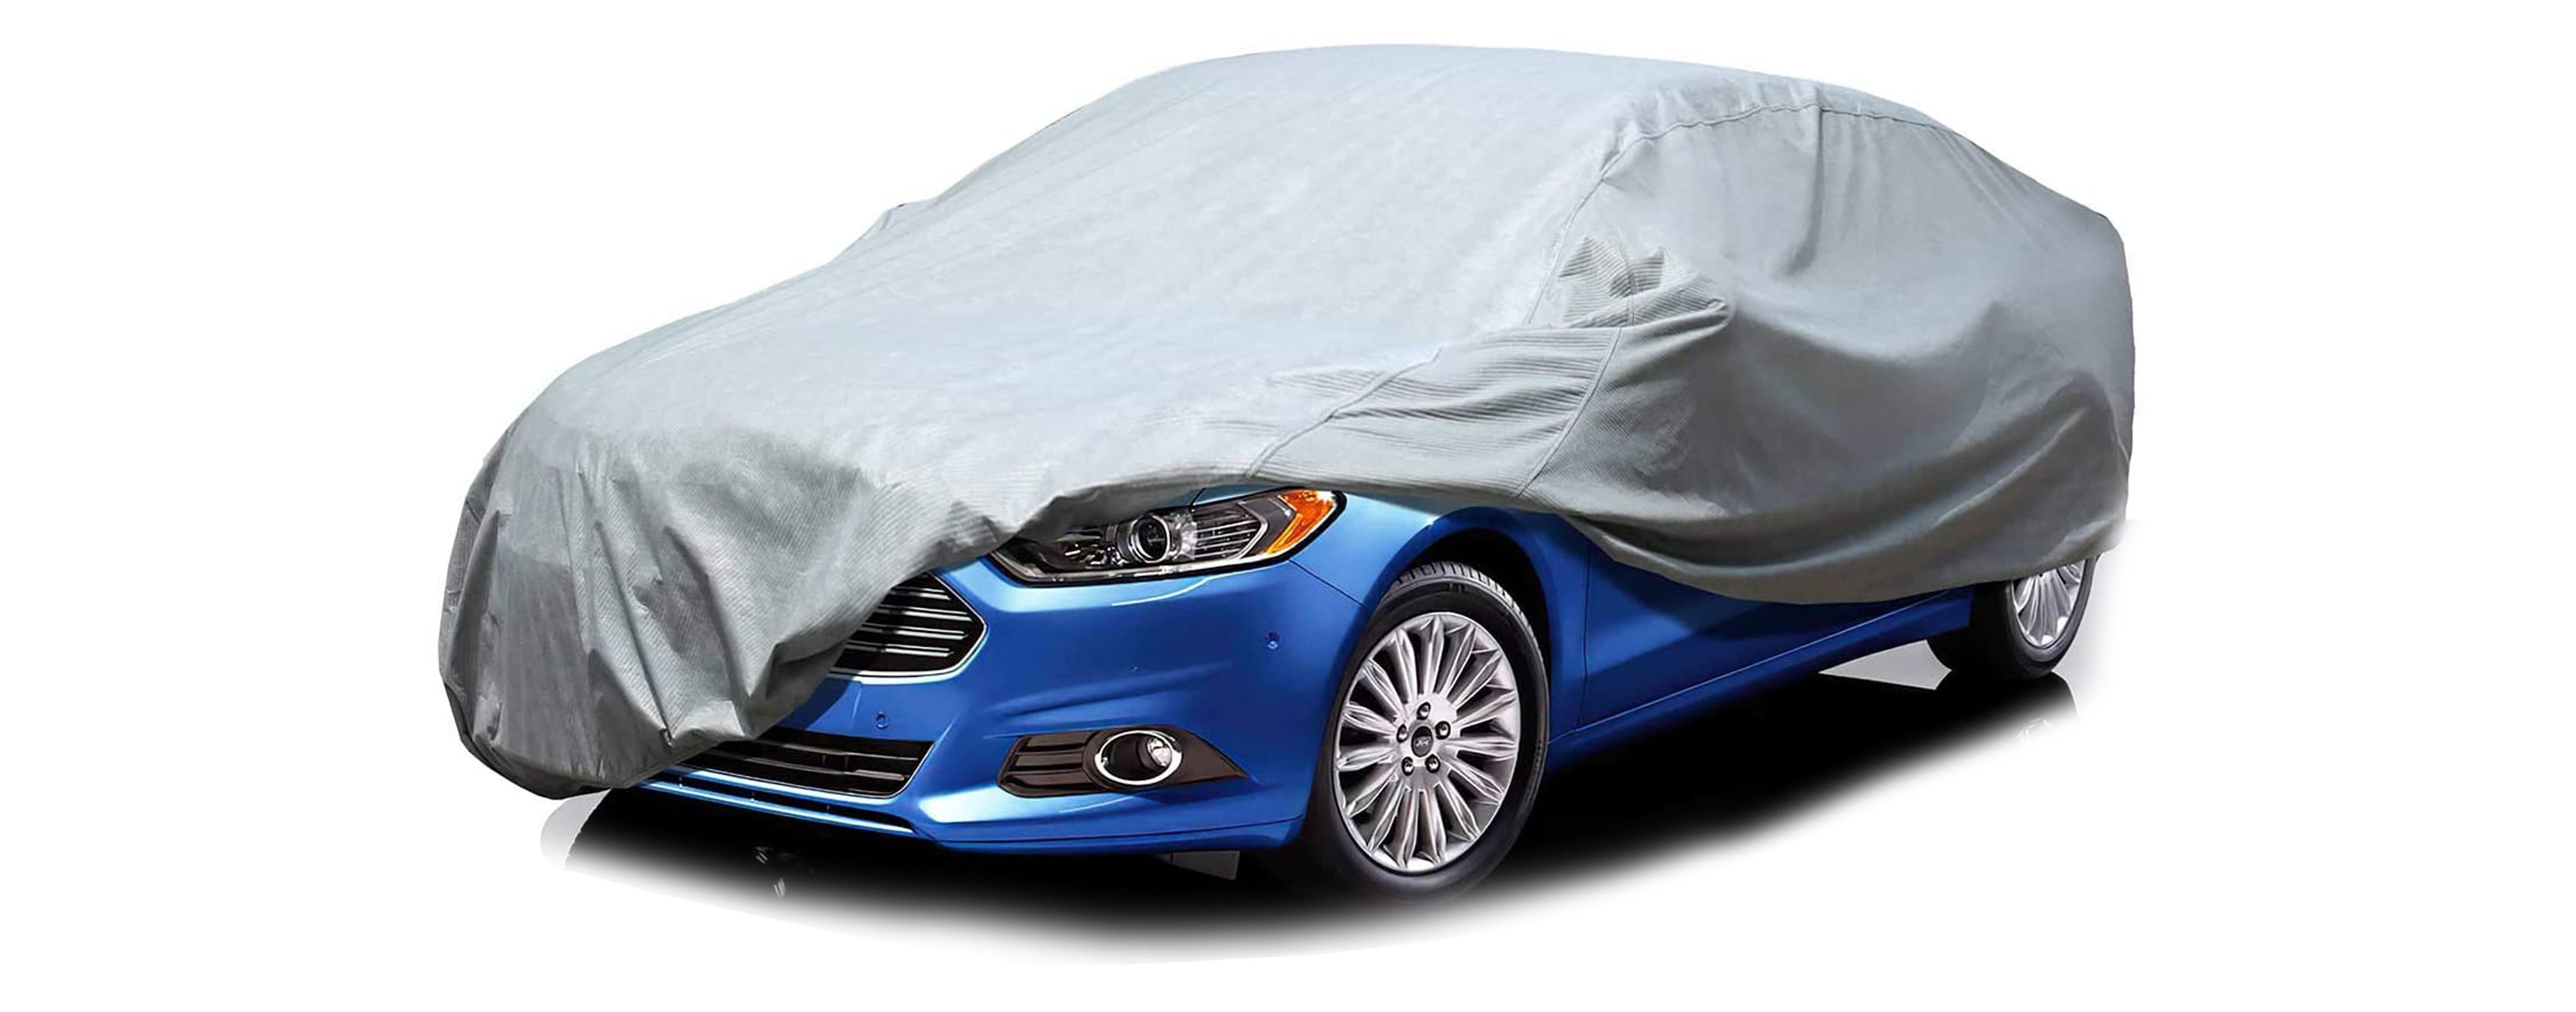 Showerproof Half Car Cover Gives UV/Weather Protection to Soft/Hard top-Small